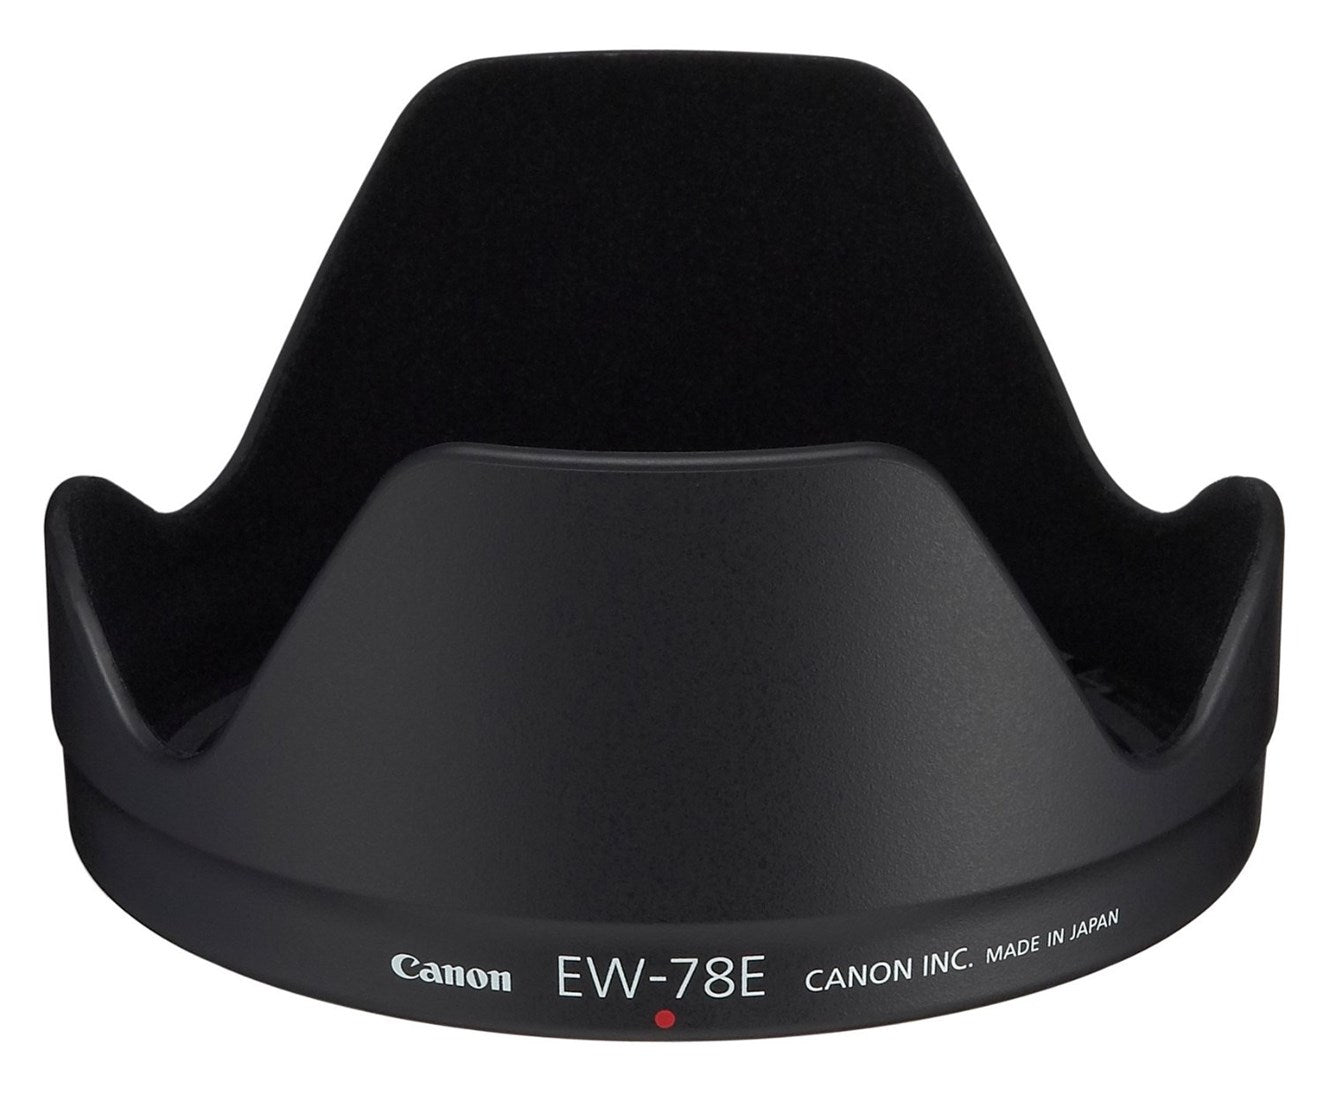 Product Image of Canon EW-78E Lens Hood for EF-S 15-85 f3.5-5.6 IS USM Lens